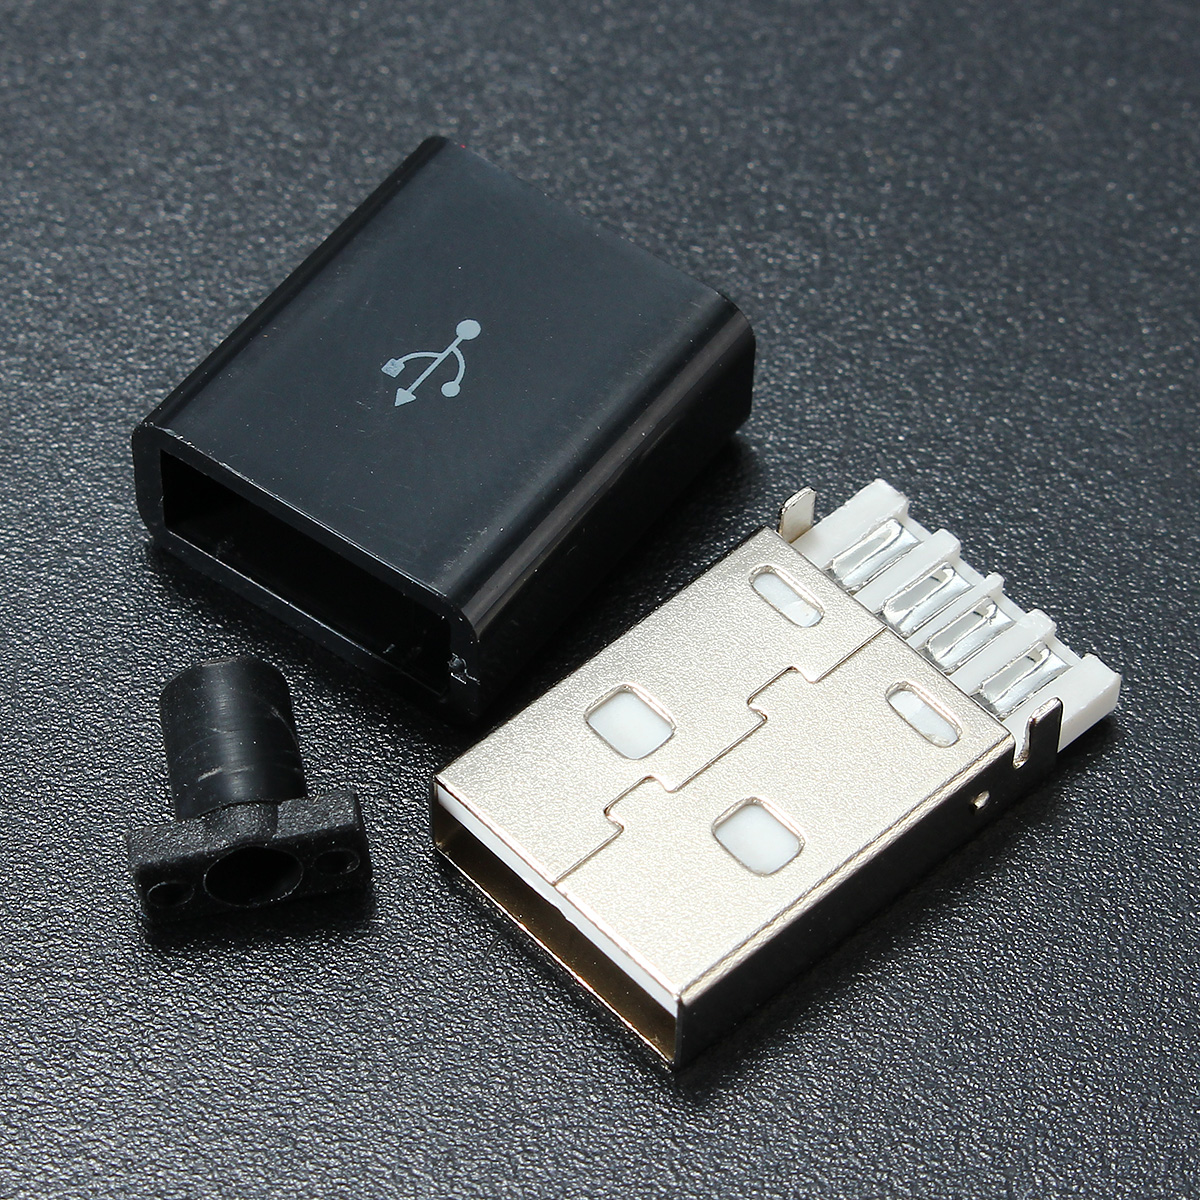 1Pcs-USB-20-Type-A-Plug-4-pin-Male-Adapter-Solder-Connector--Black-Cover-Square-1287374-1